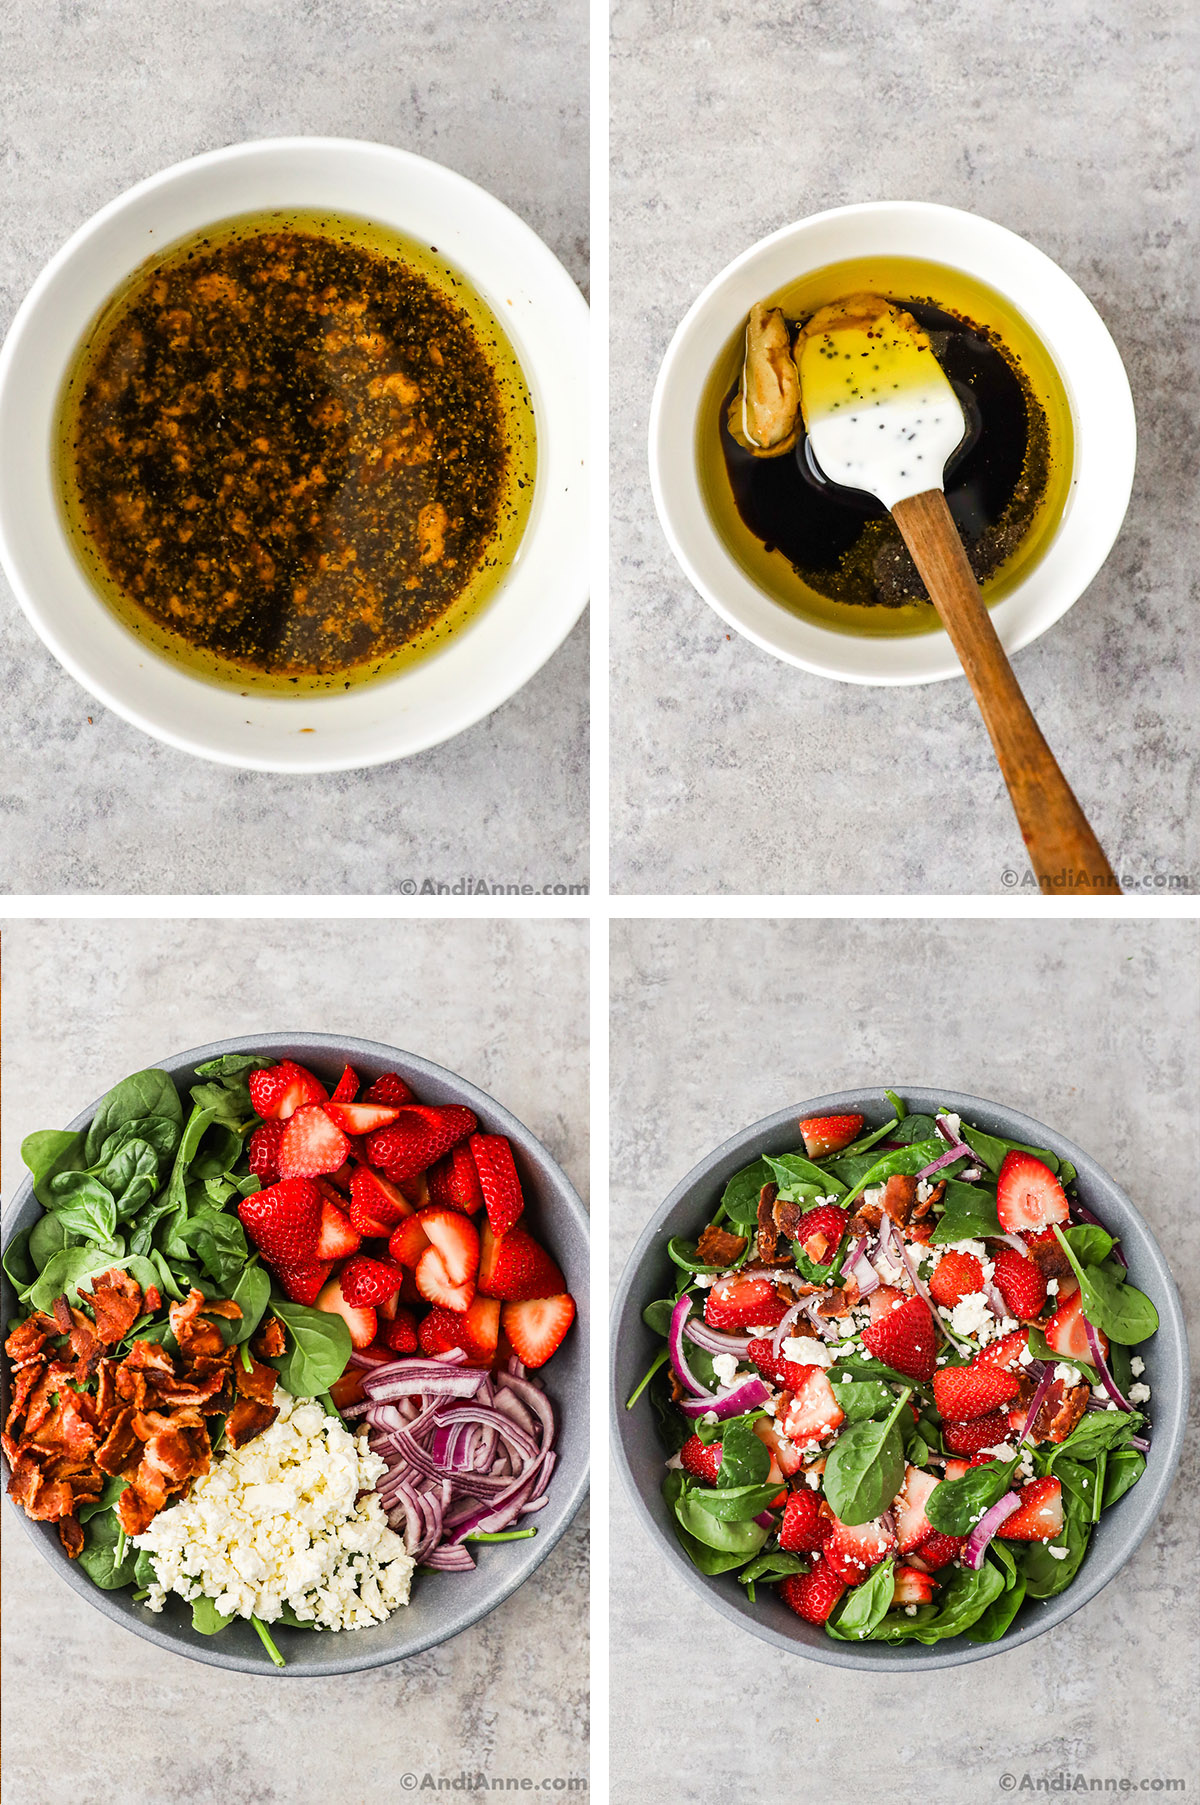 Four images together, First two of salad dressing ingredients in a small bowl. Second two of chopped strawberries, onion, bacon and feta over spinach, first unmixed then mixed together.